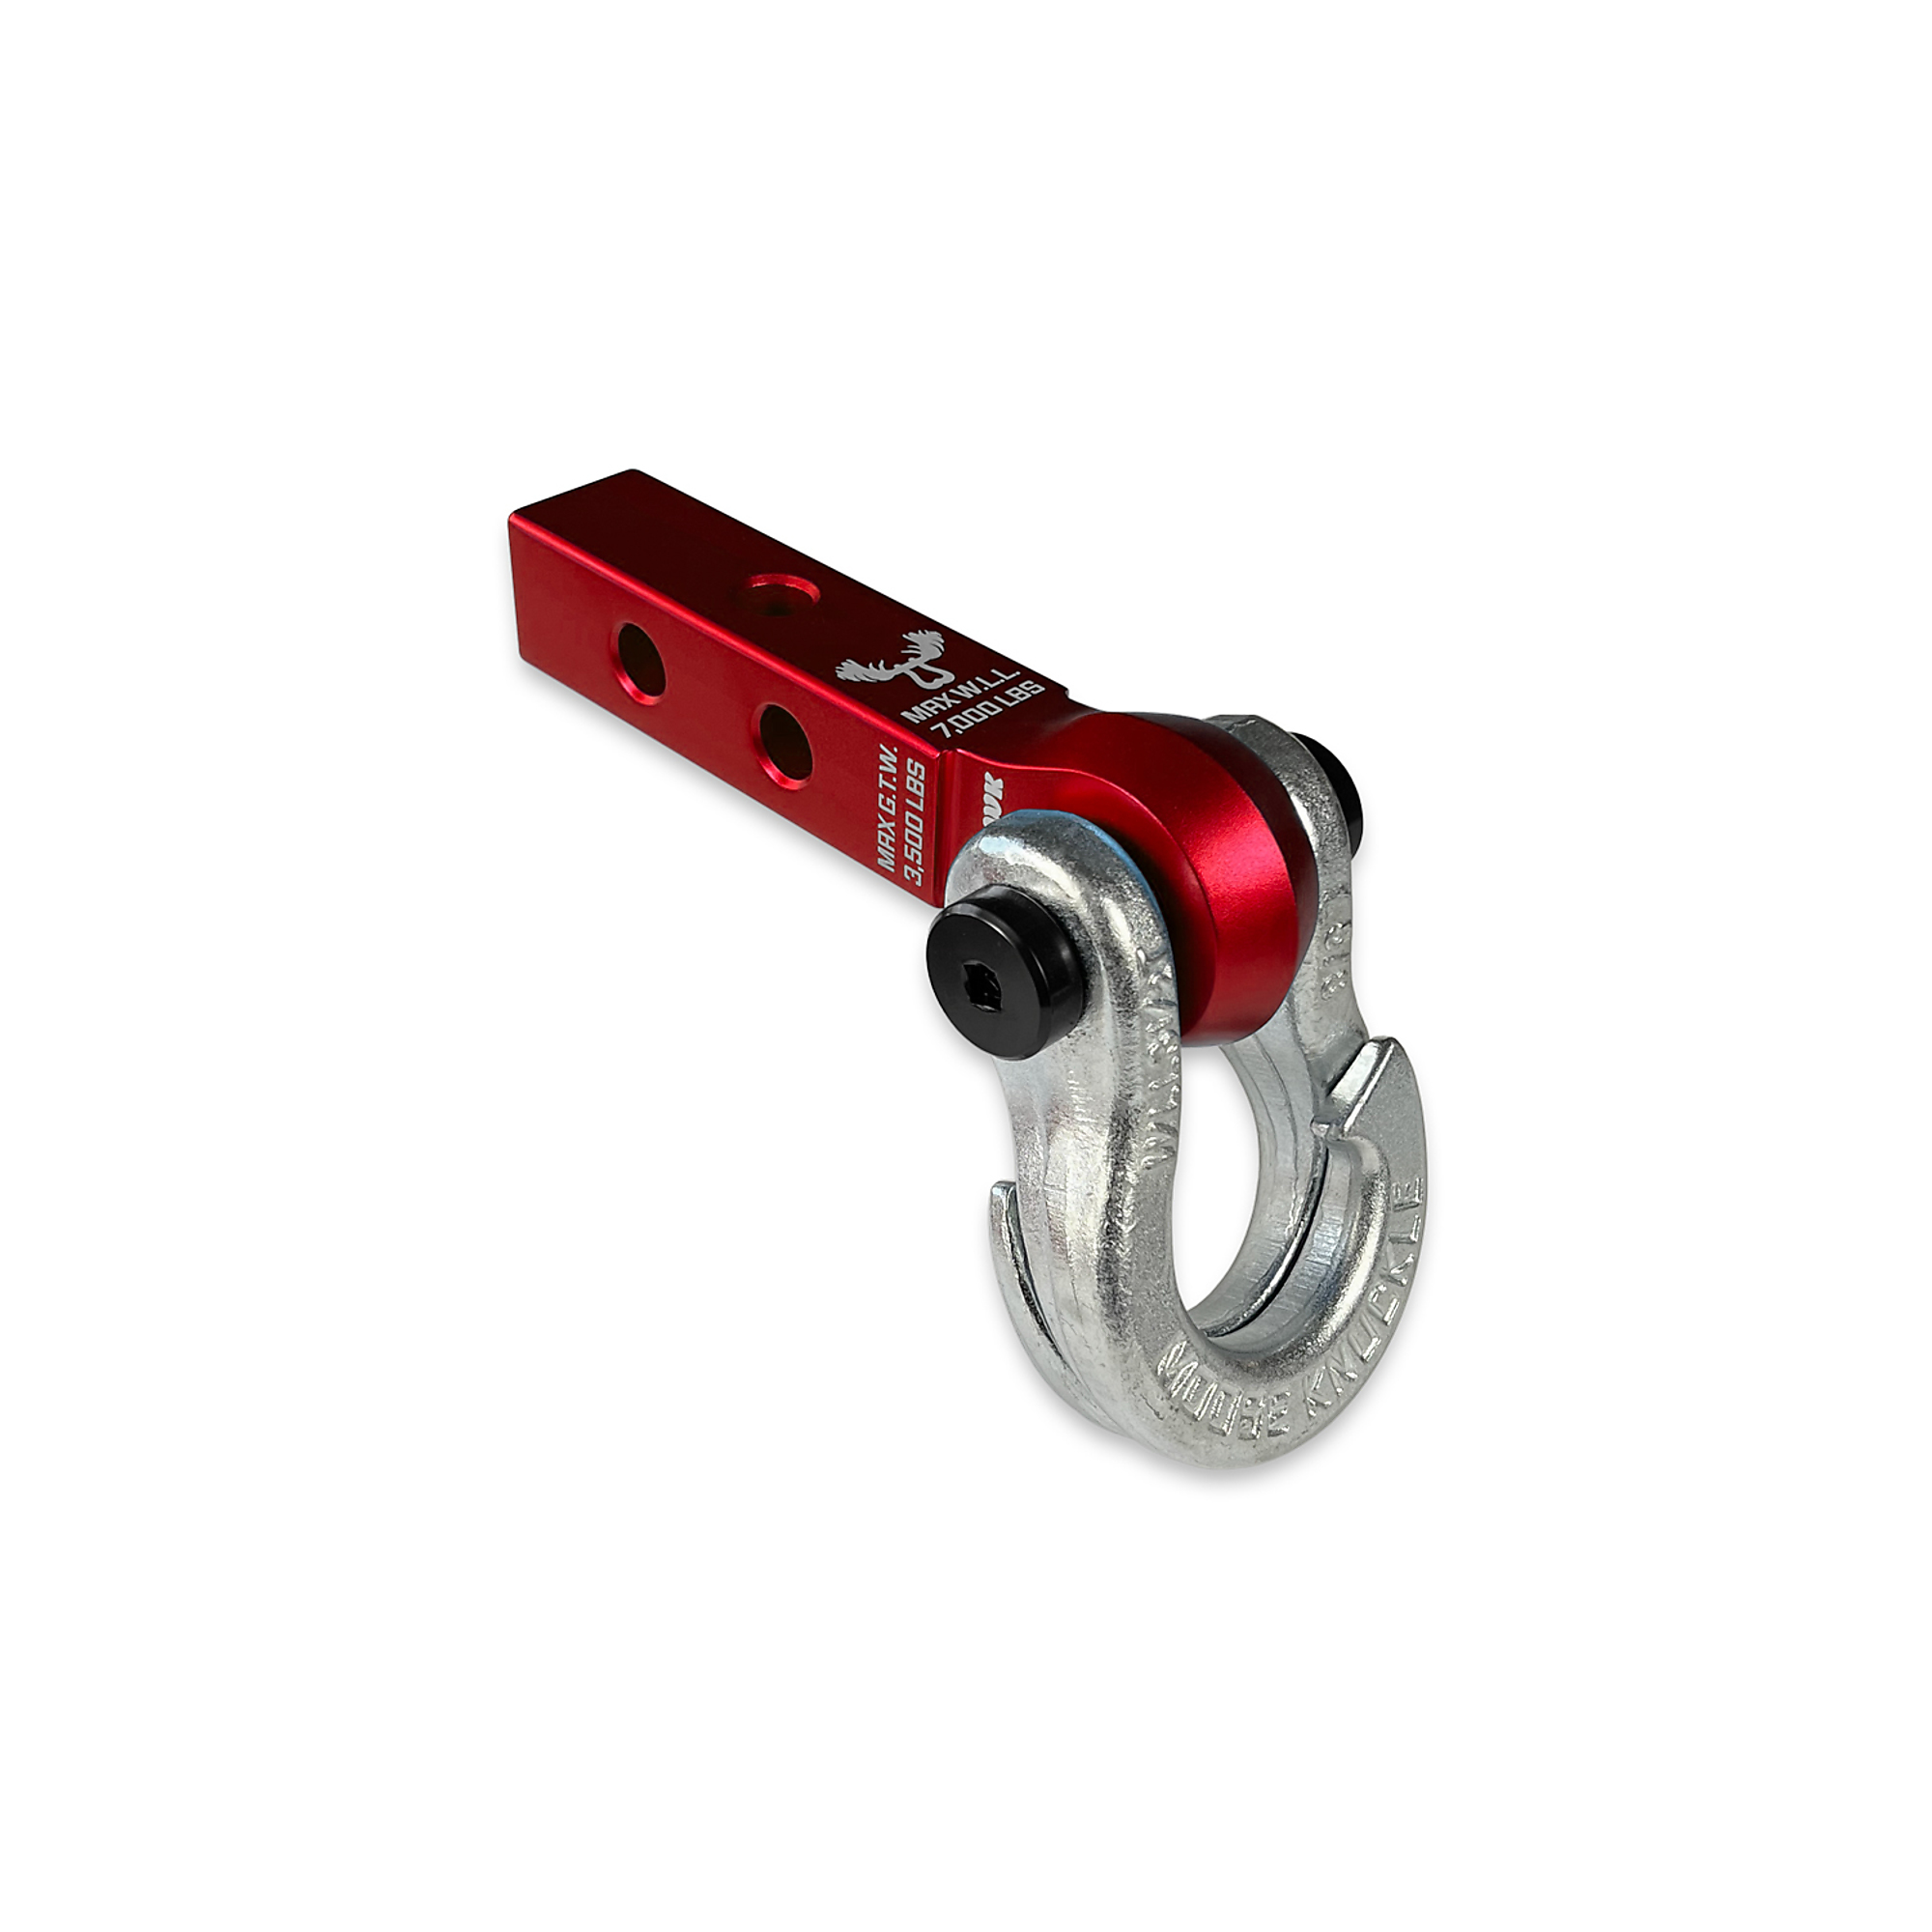 Moose Knuckle Offroad, 5/8 Jowl Split Shackle and Mohawk 1.25 Receiver Combo, Gross Towing Weight 3500 lb, Class Rating Class II, Model FN000044-012